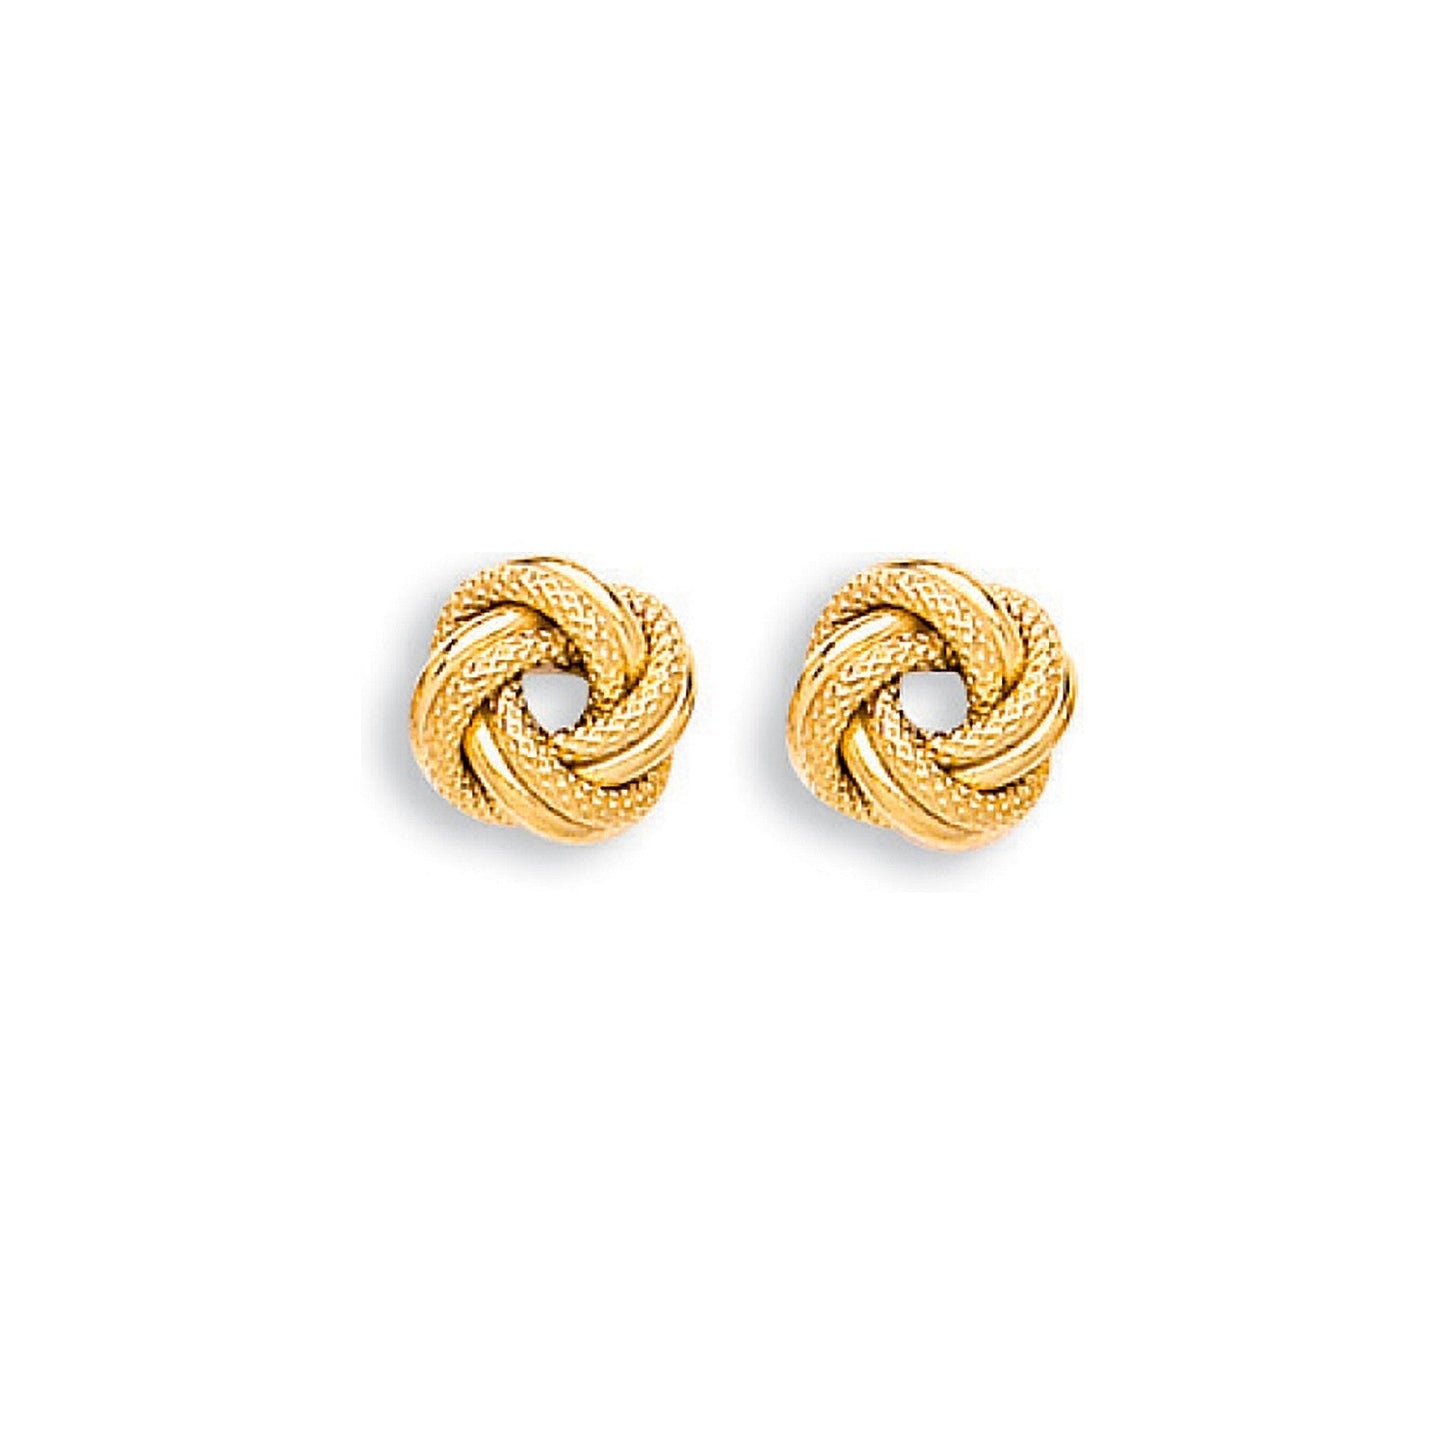 9ct Yellow Gold Knot Stud Earrings 8.5mm - FJewellery